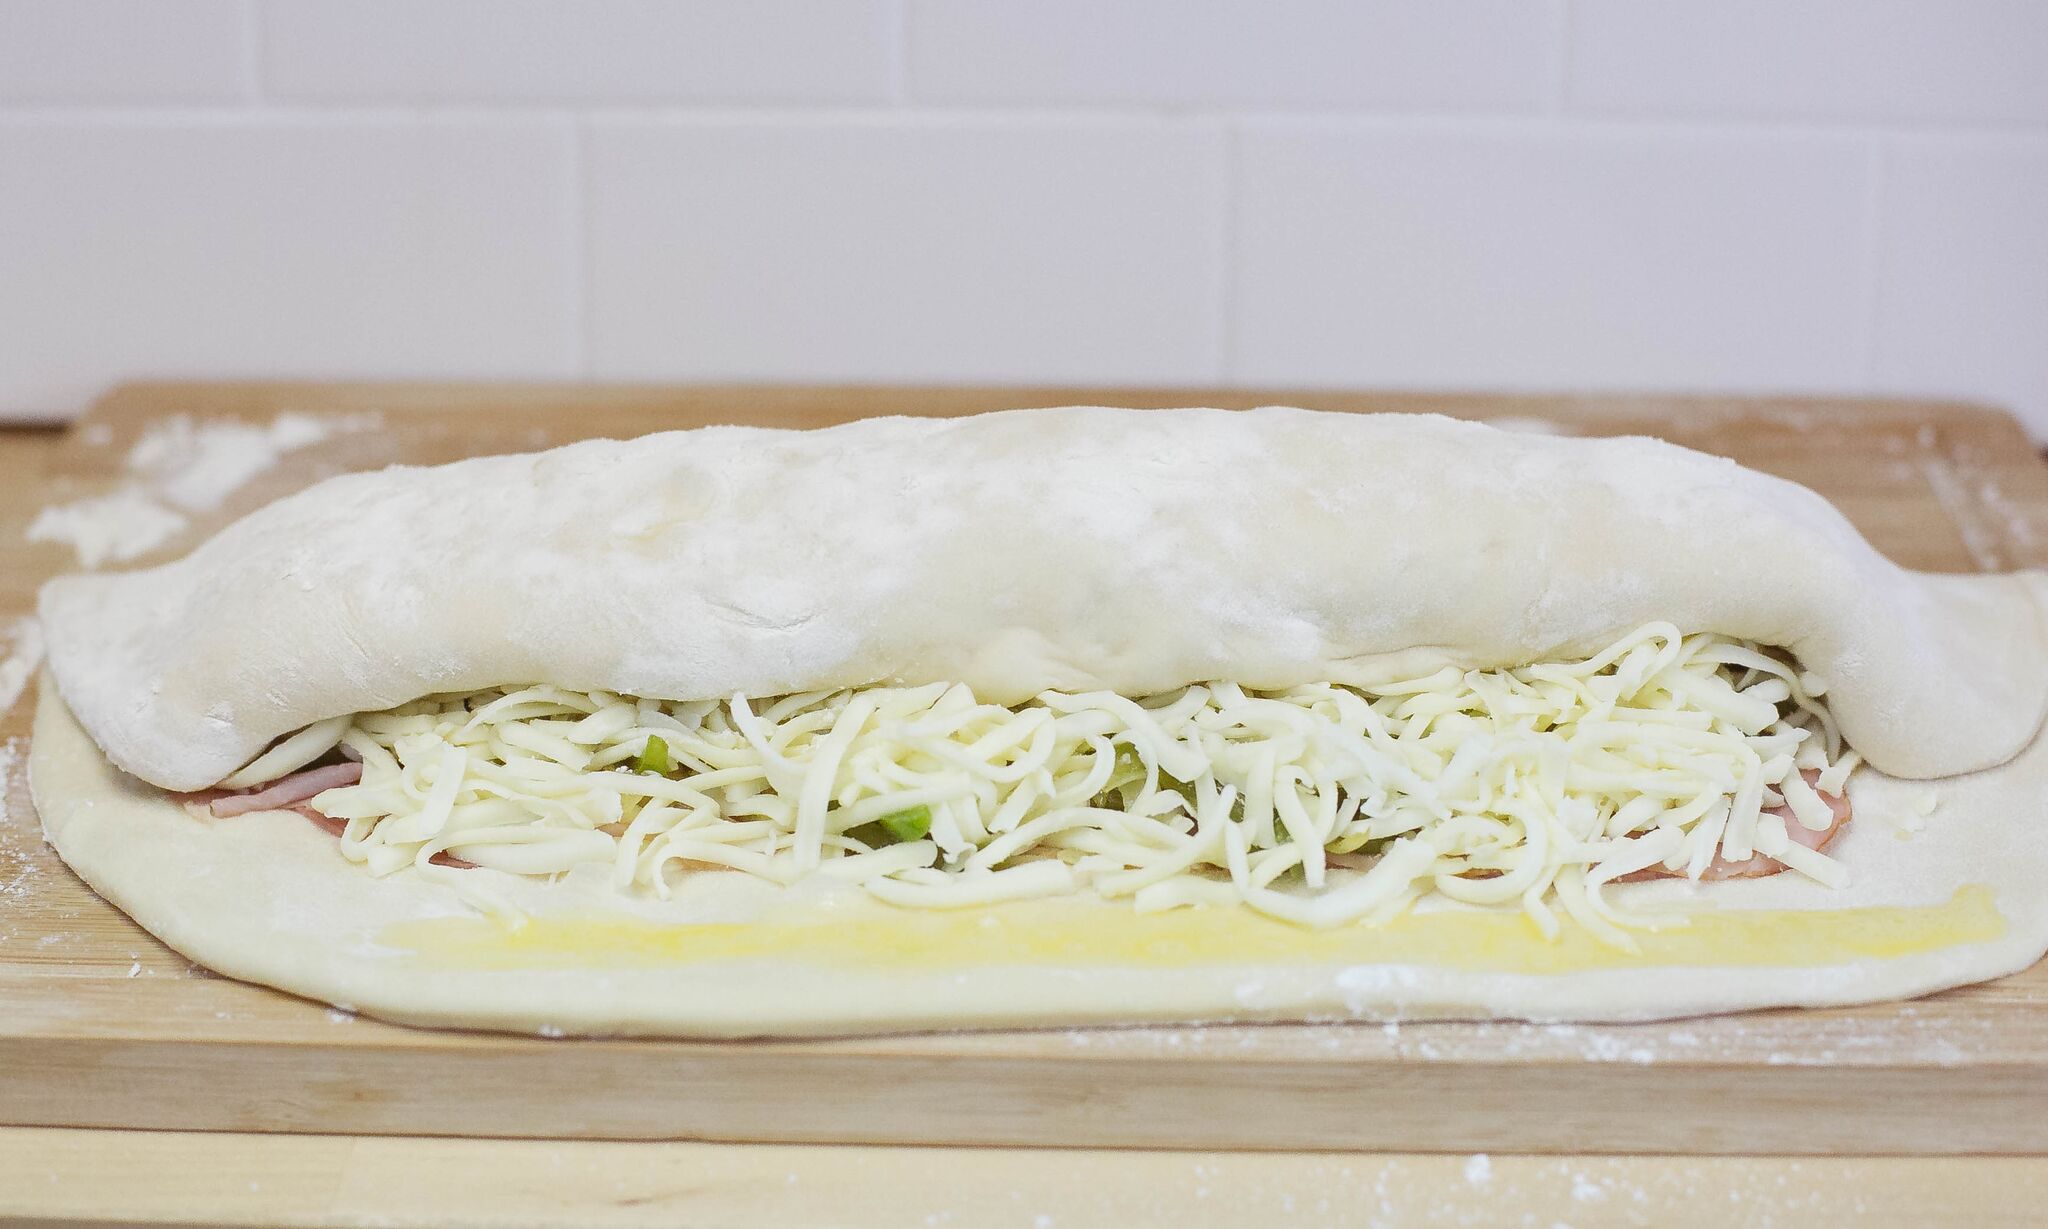 Coat the boarder of the dough with egg wash then begin rolling it up. 